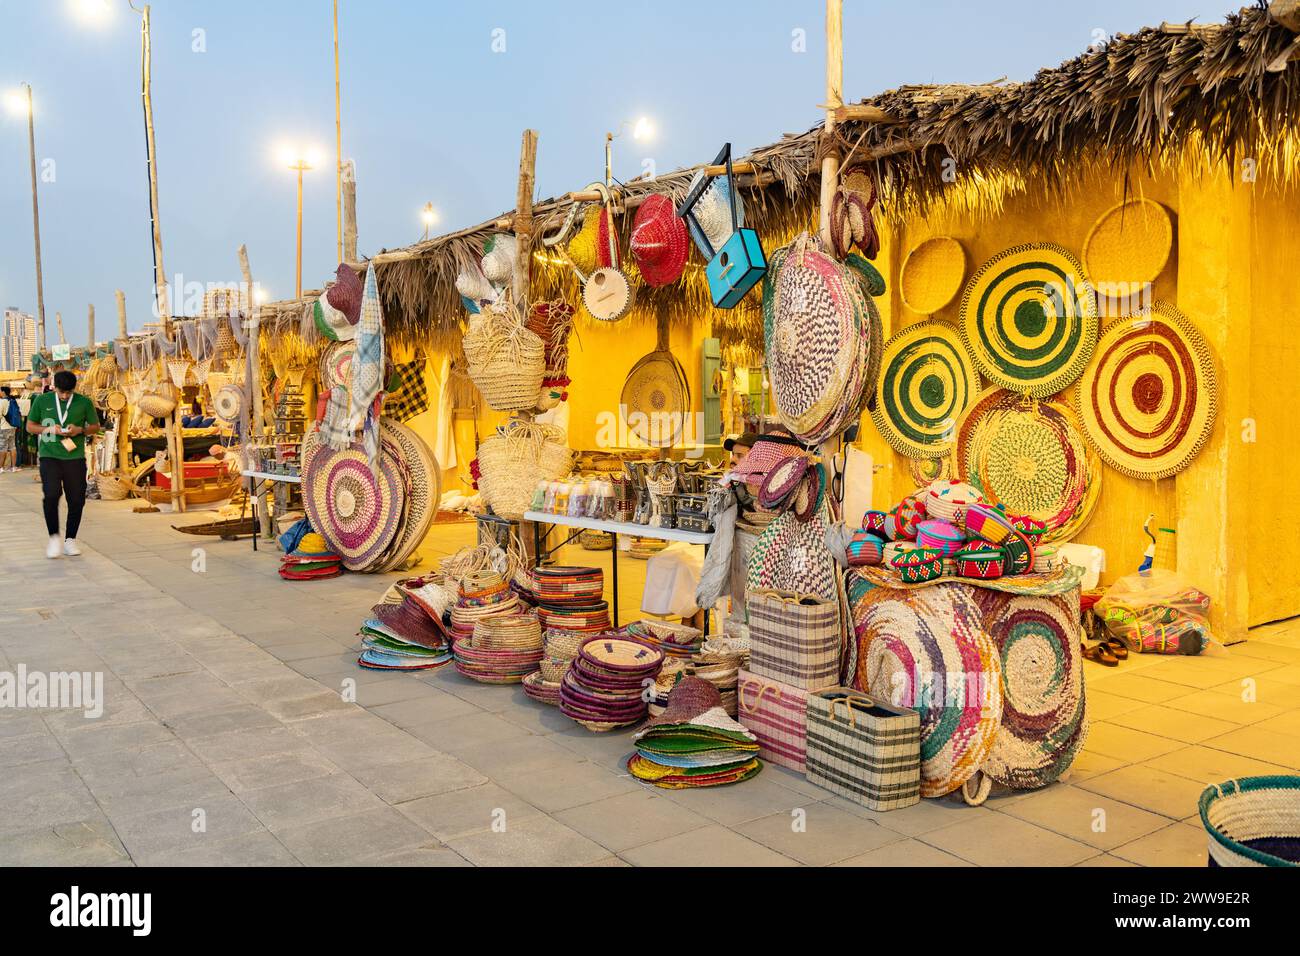 Woven mats and baskets from dried palm leaves with enlarged images. Traditional art and handicrafts in Doha, Qatar Stock Photo